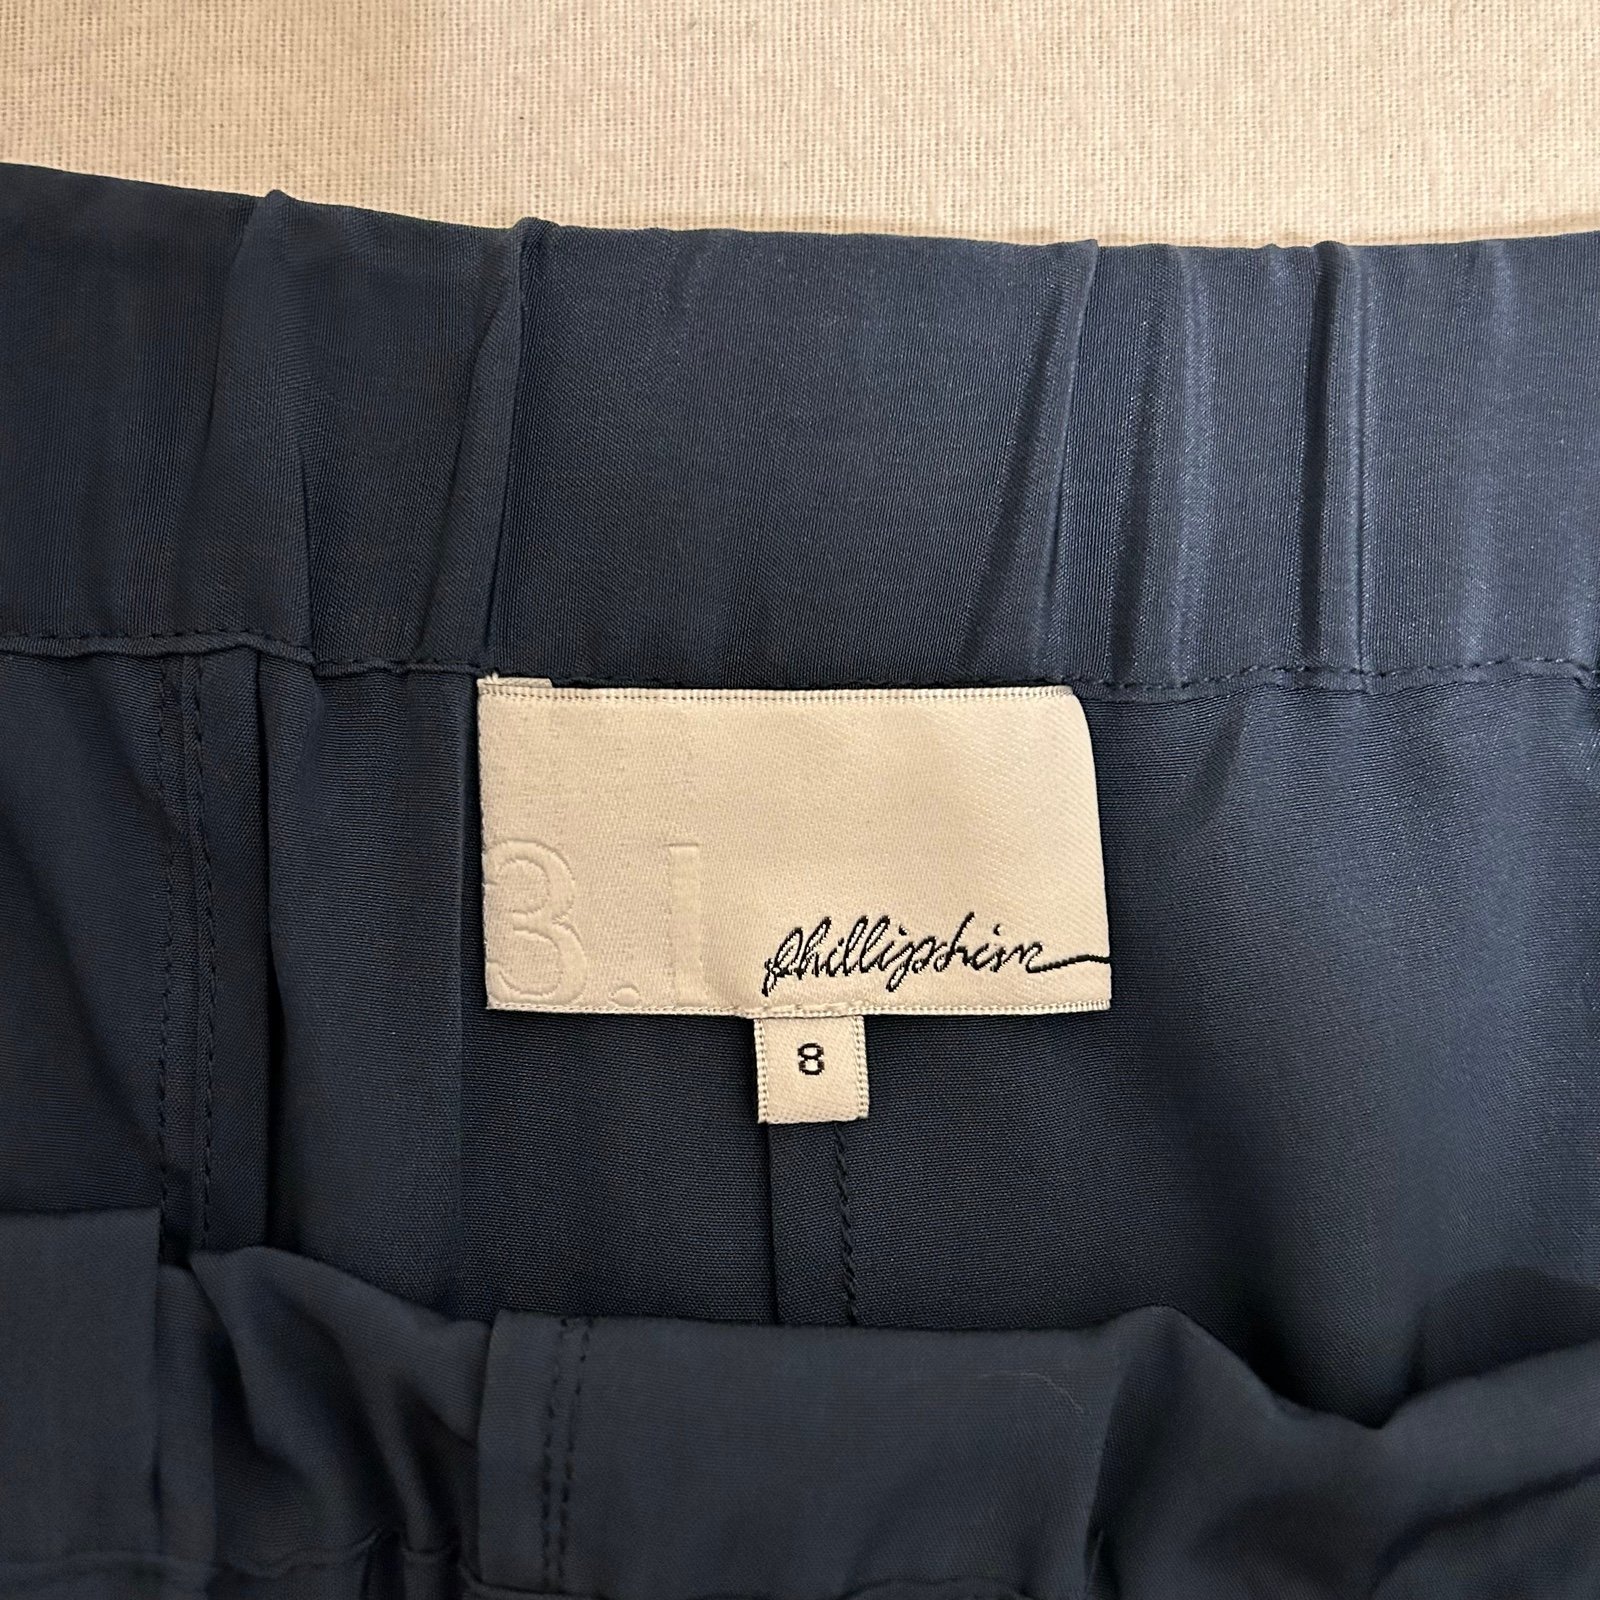 Simple 3.1 Phillip Lim Jodhpur Blue Pull On 100% Silk Trousers Pant High Rise Size 8 g3DB0vUDS Store Online